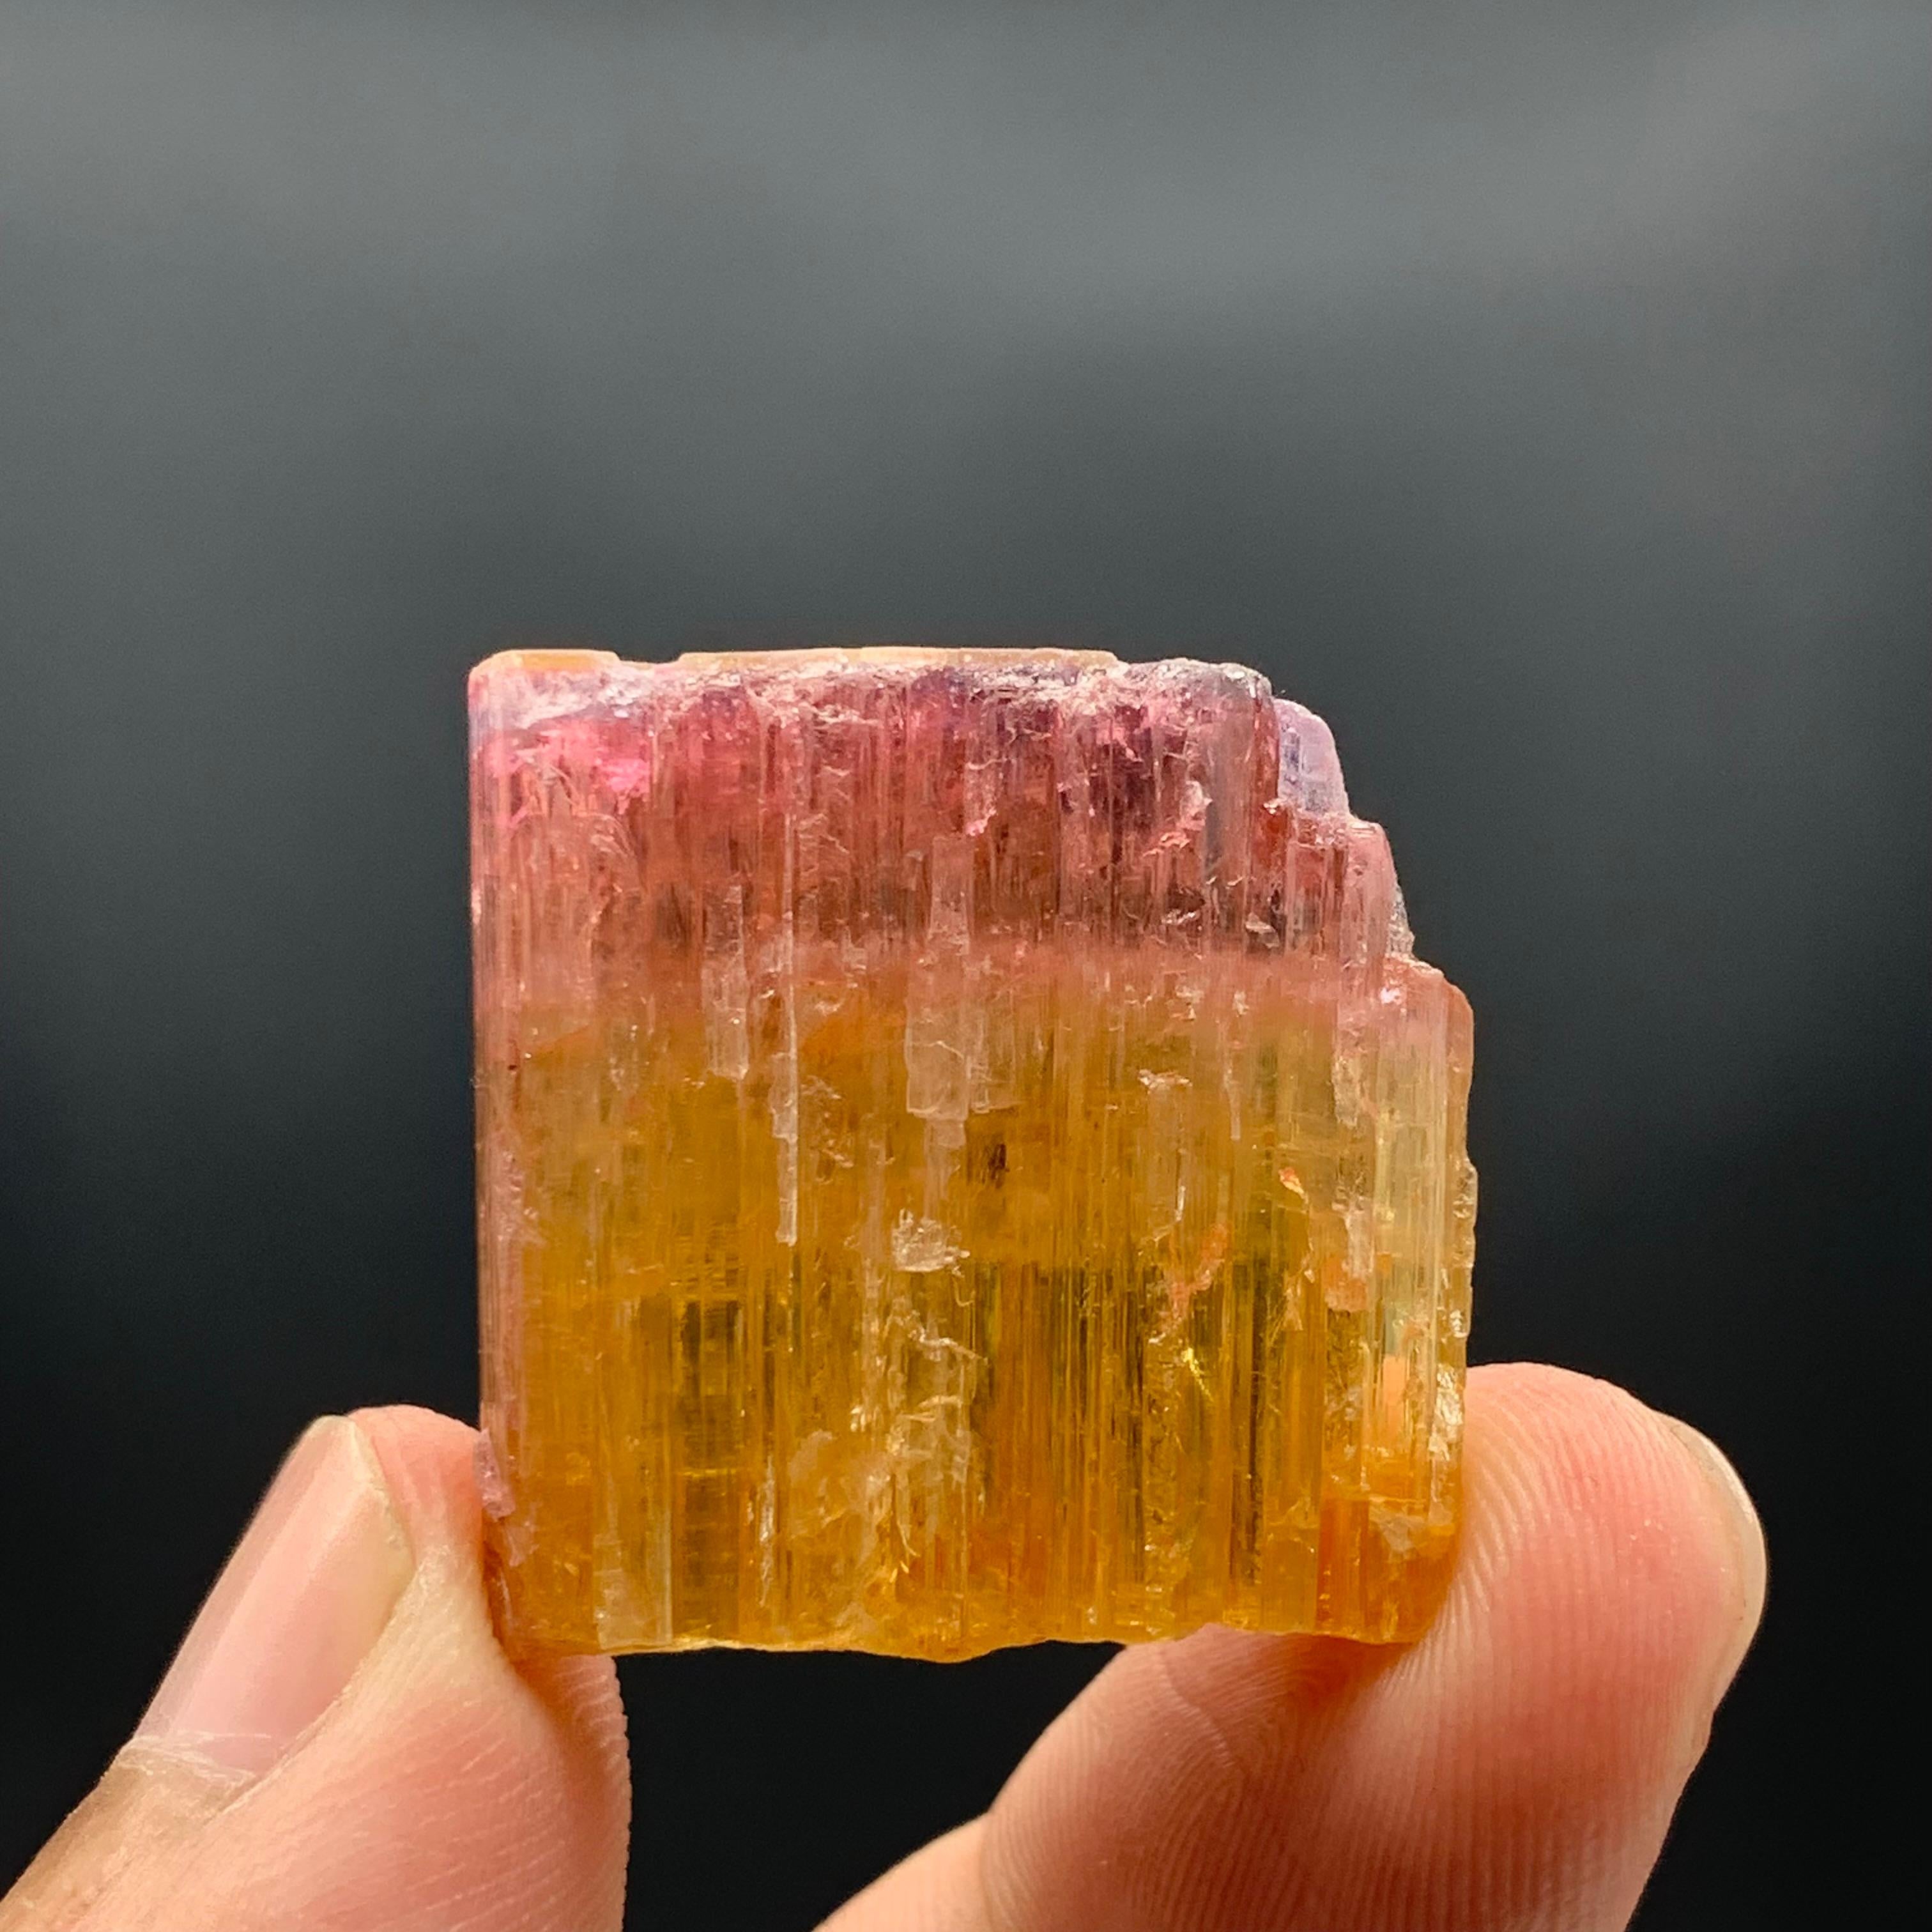 59.15 Carat Beautiful Bi Color Tourmaline Crystal From Paprook Mine, Afghanistan For Sale 2